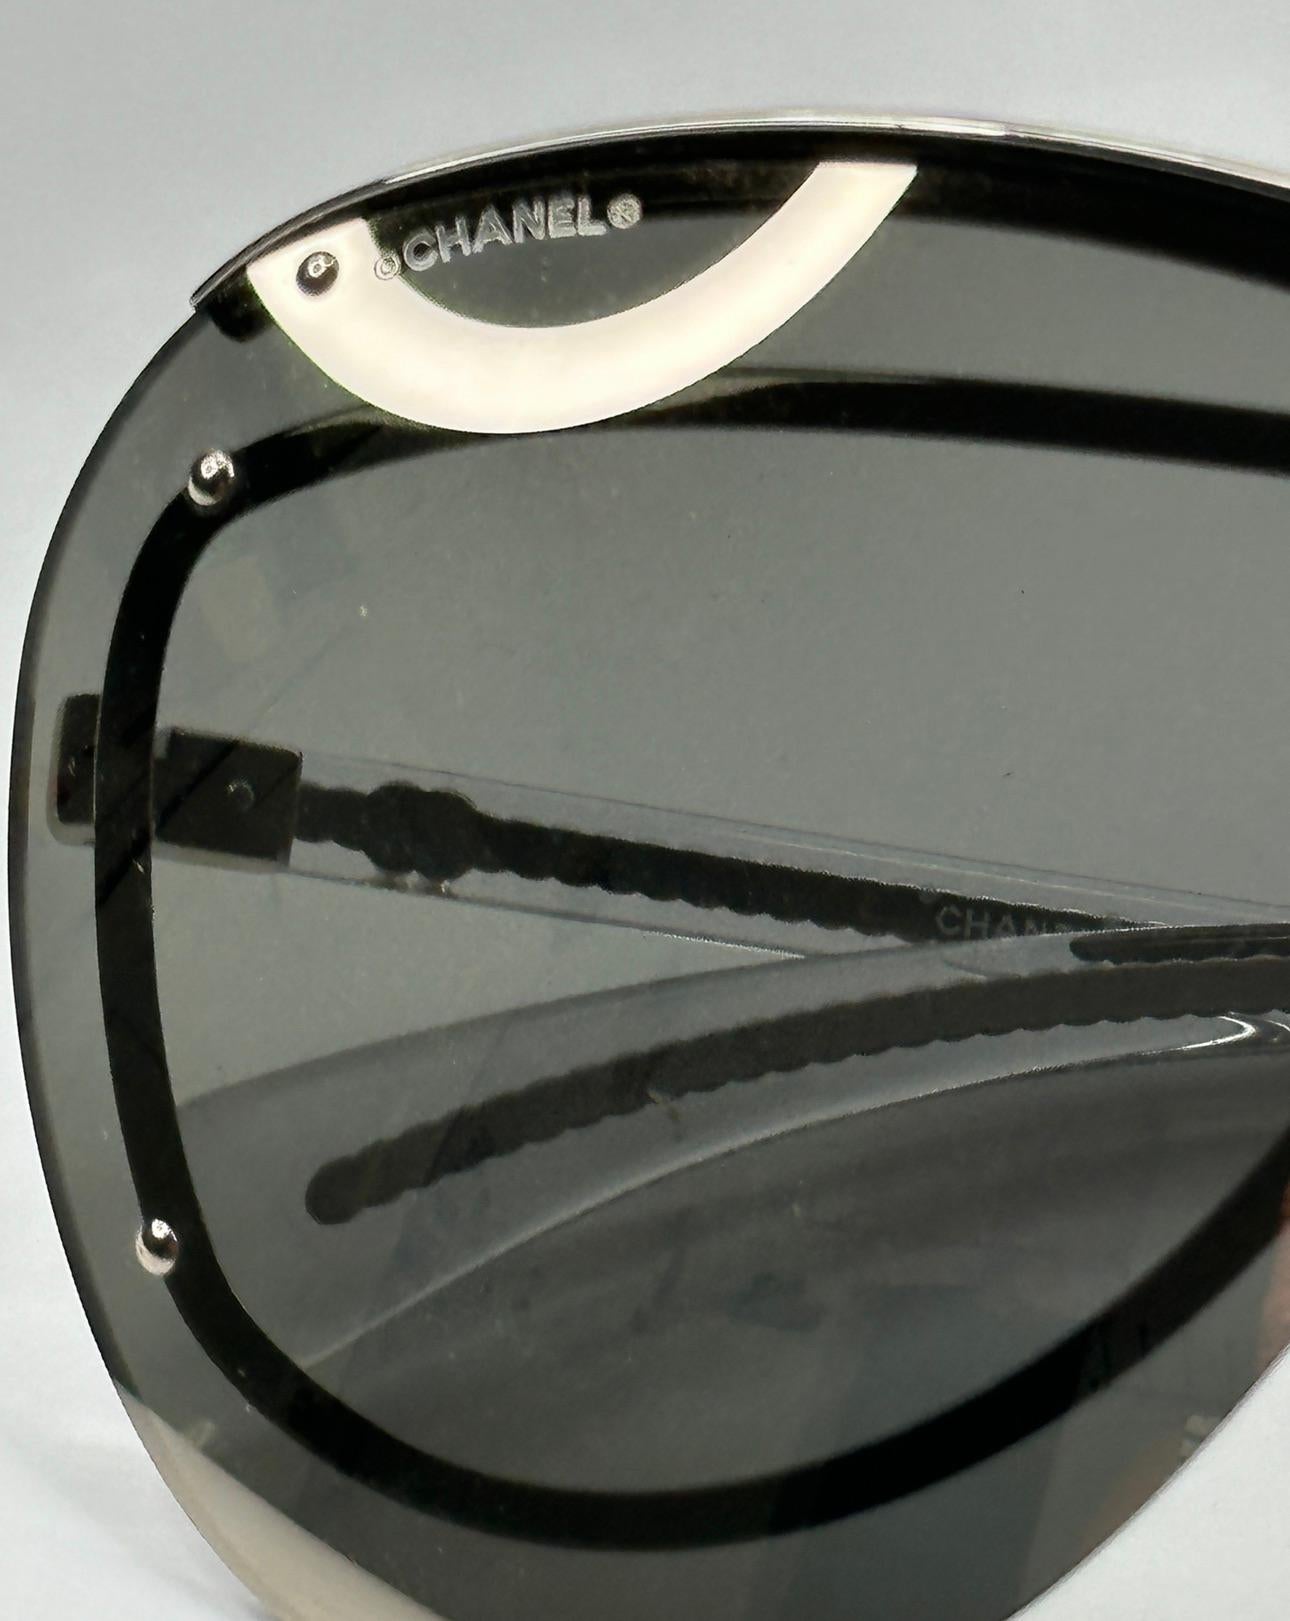 Chanel 'Limited Edition' mirrored silver-chrome finish accented with chrome studs space-age sunglasses features curved arms for a better fit and measures 5 1/4 inches in length. The front measures 5 1/2 inches across, height is 2 1/2 inches. Arms